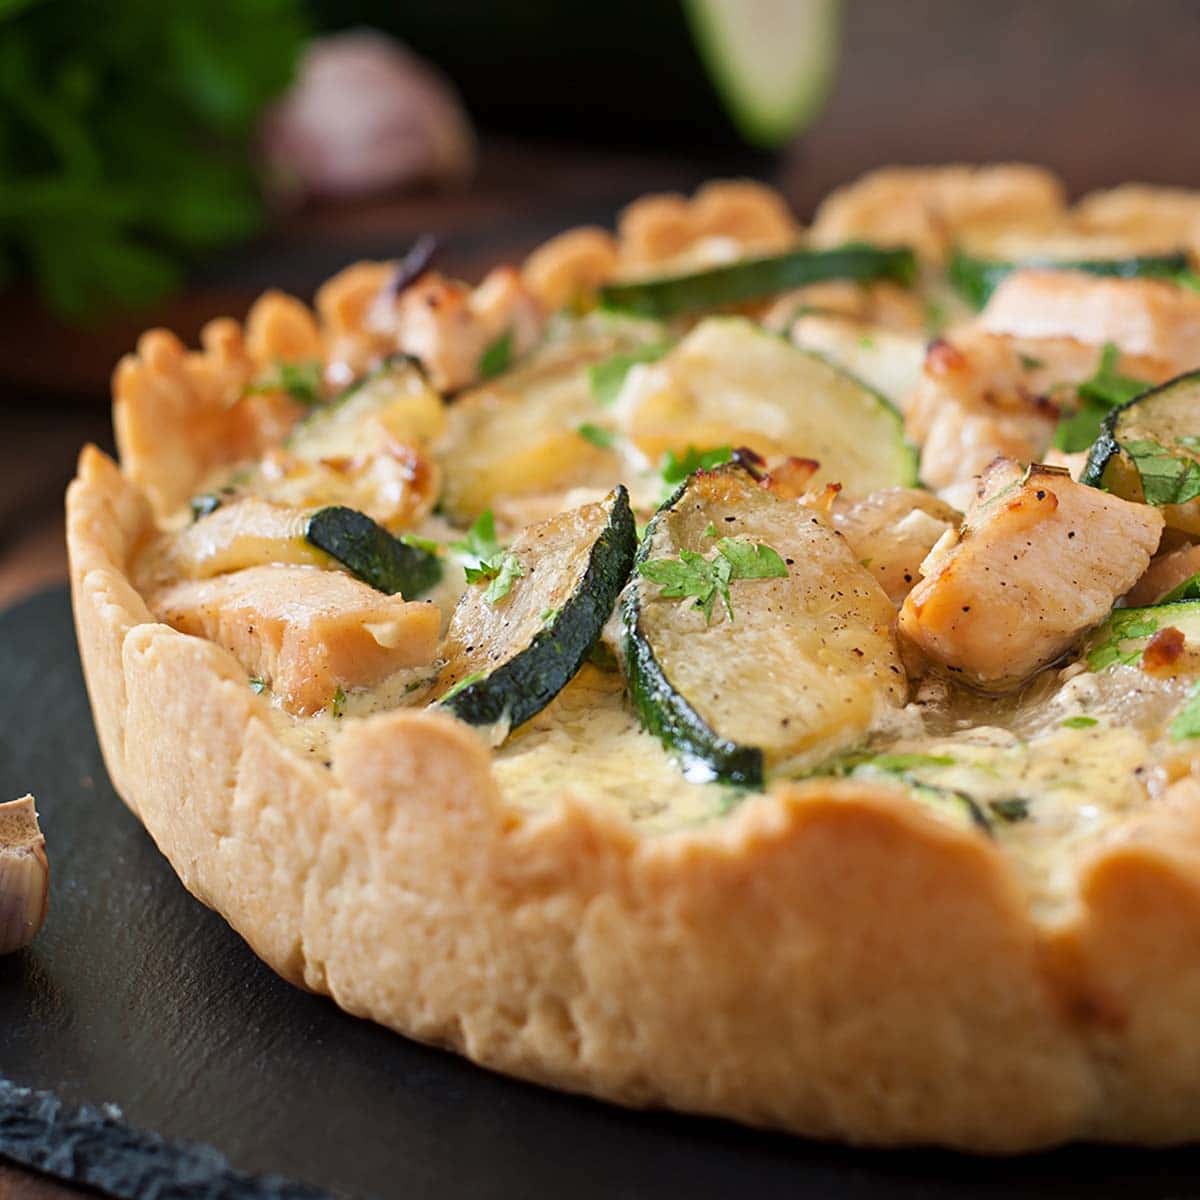 Once you finish baking the quiche, you need to leave it out in the open for 15 to 20 minutes or so until it has cooled down to room temperature.